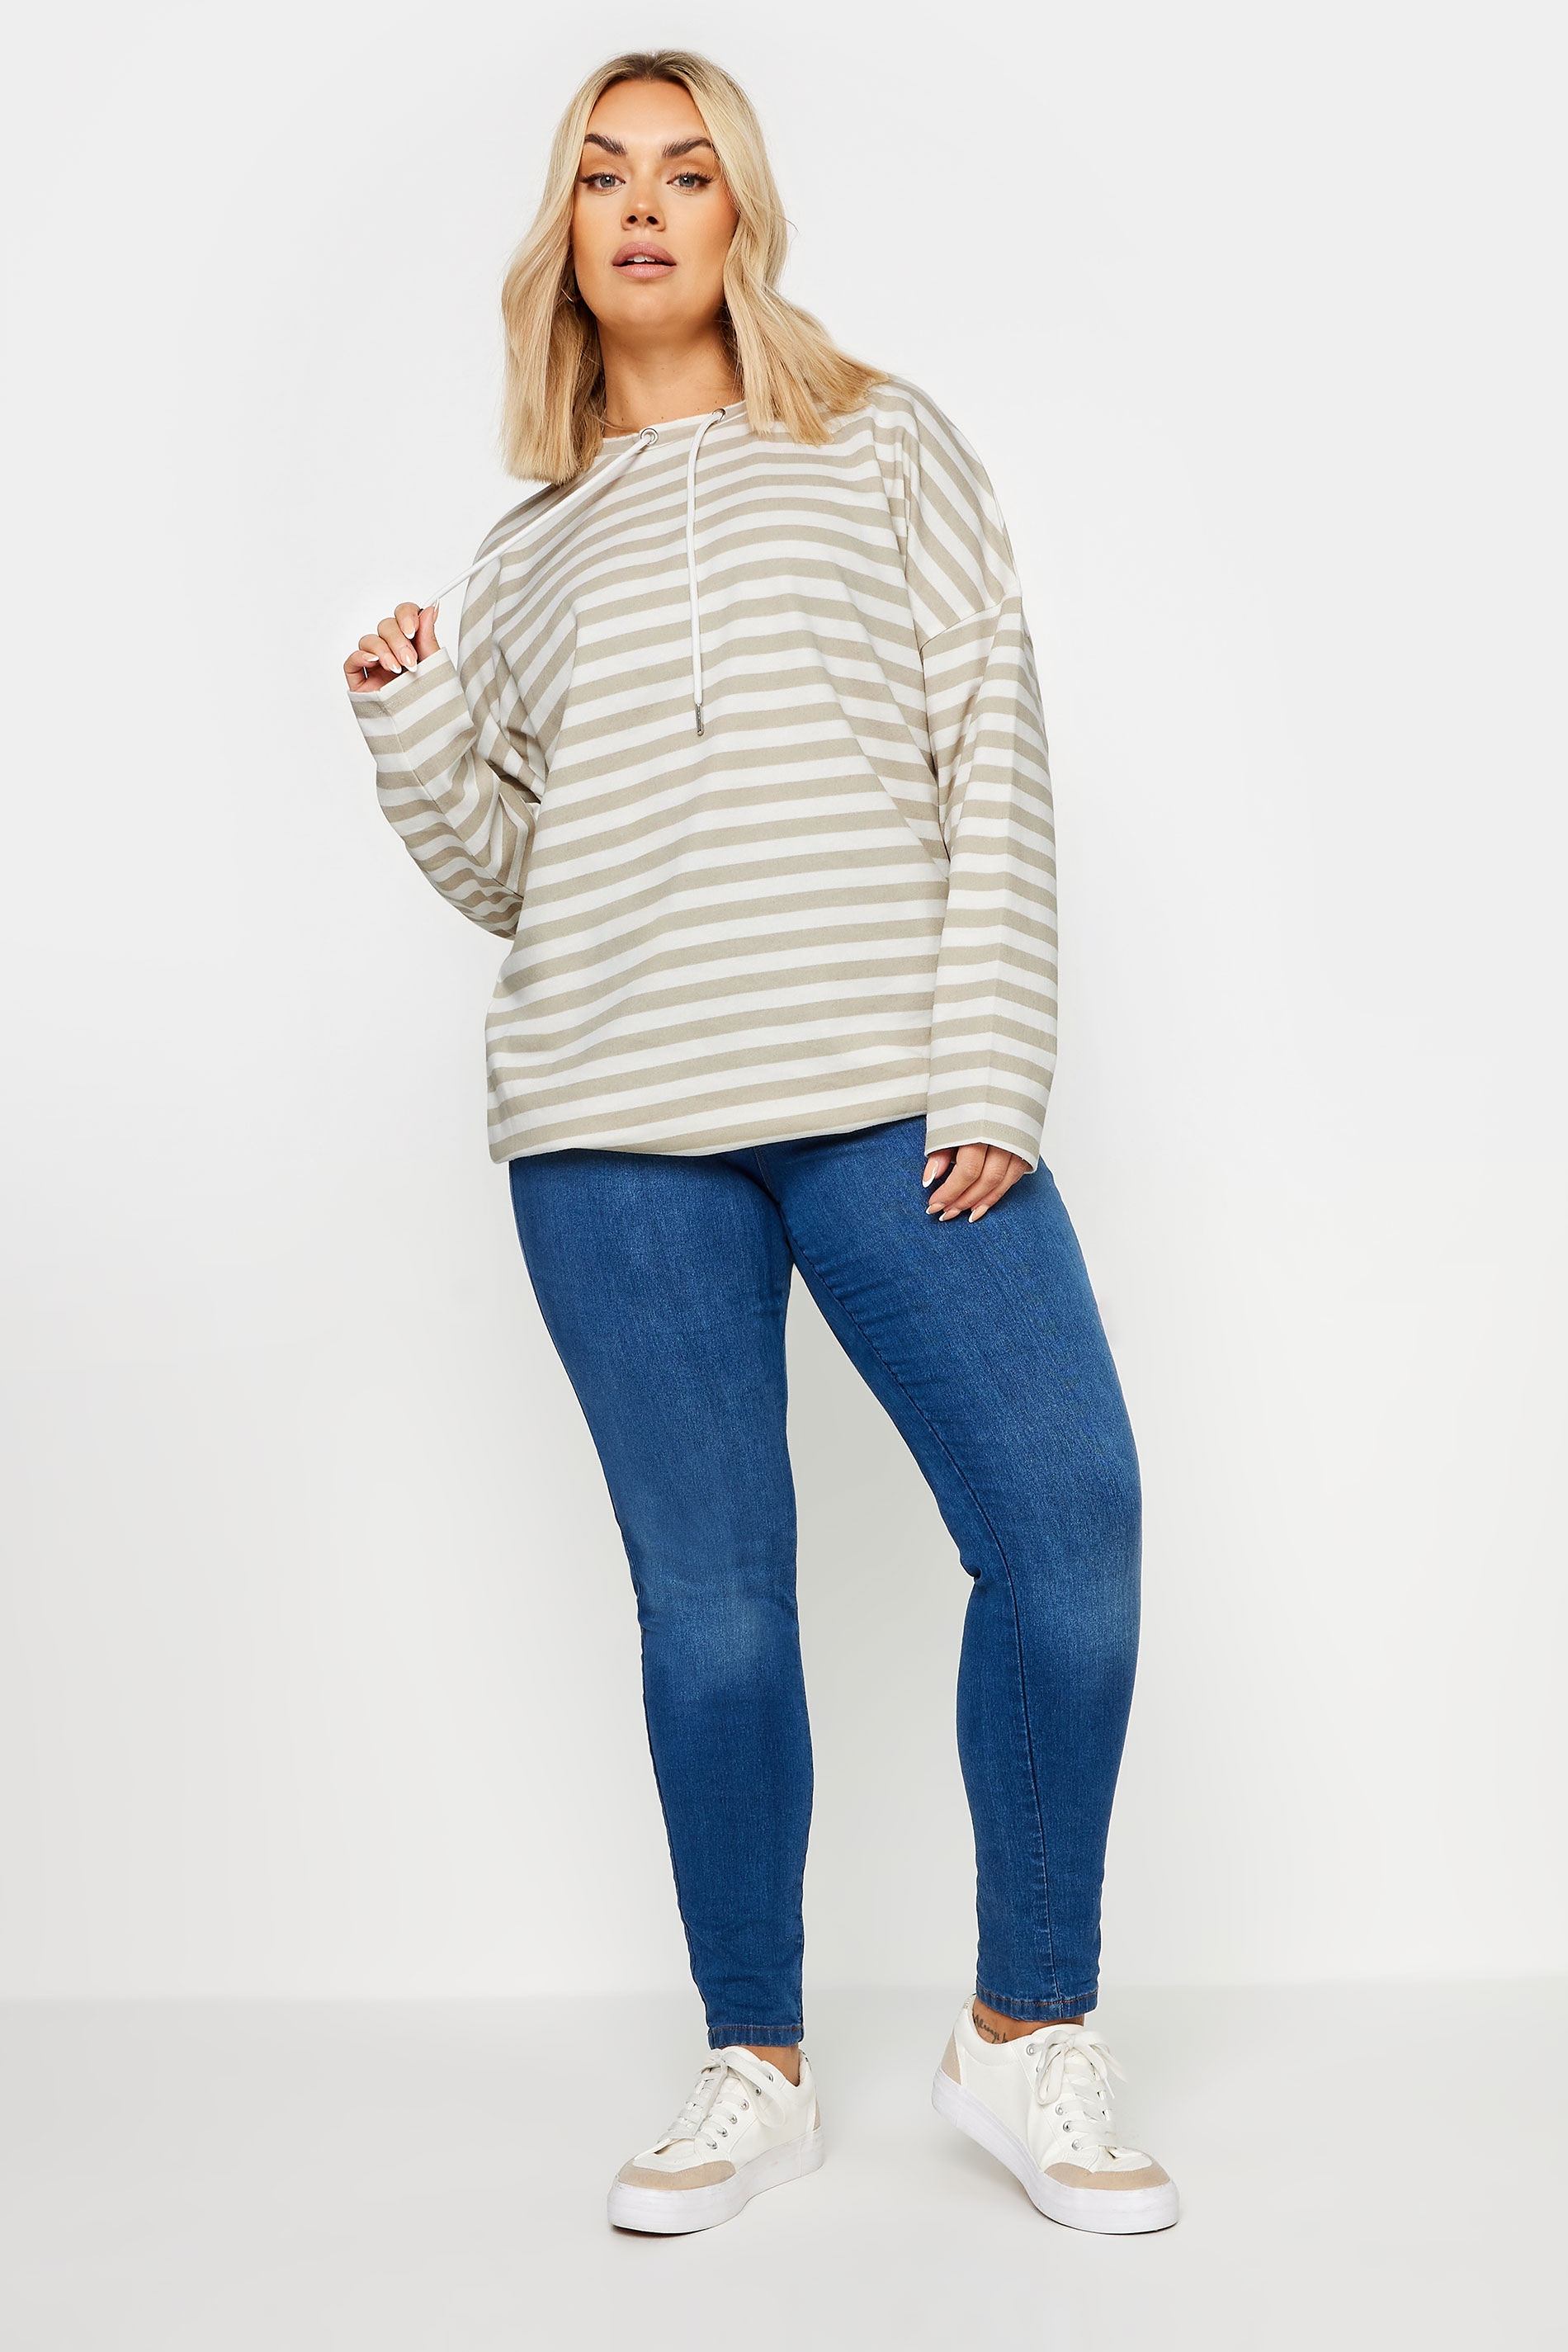 YOURS Plus Size Natural Brown & White Striped Sweatshirt | Yours Clothing 2